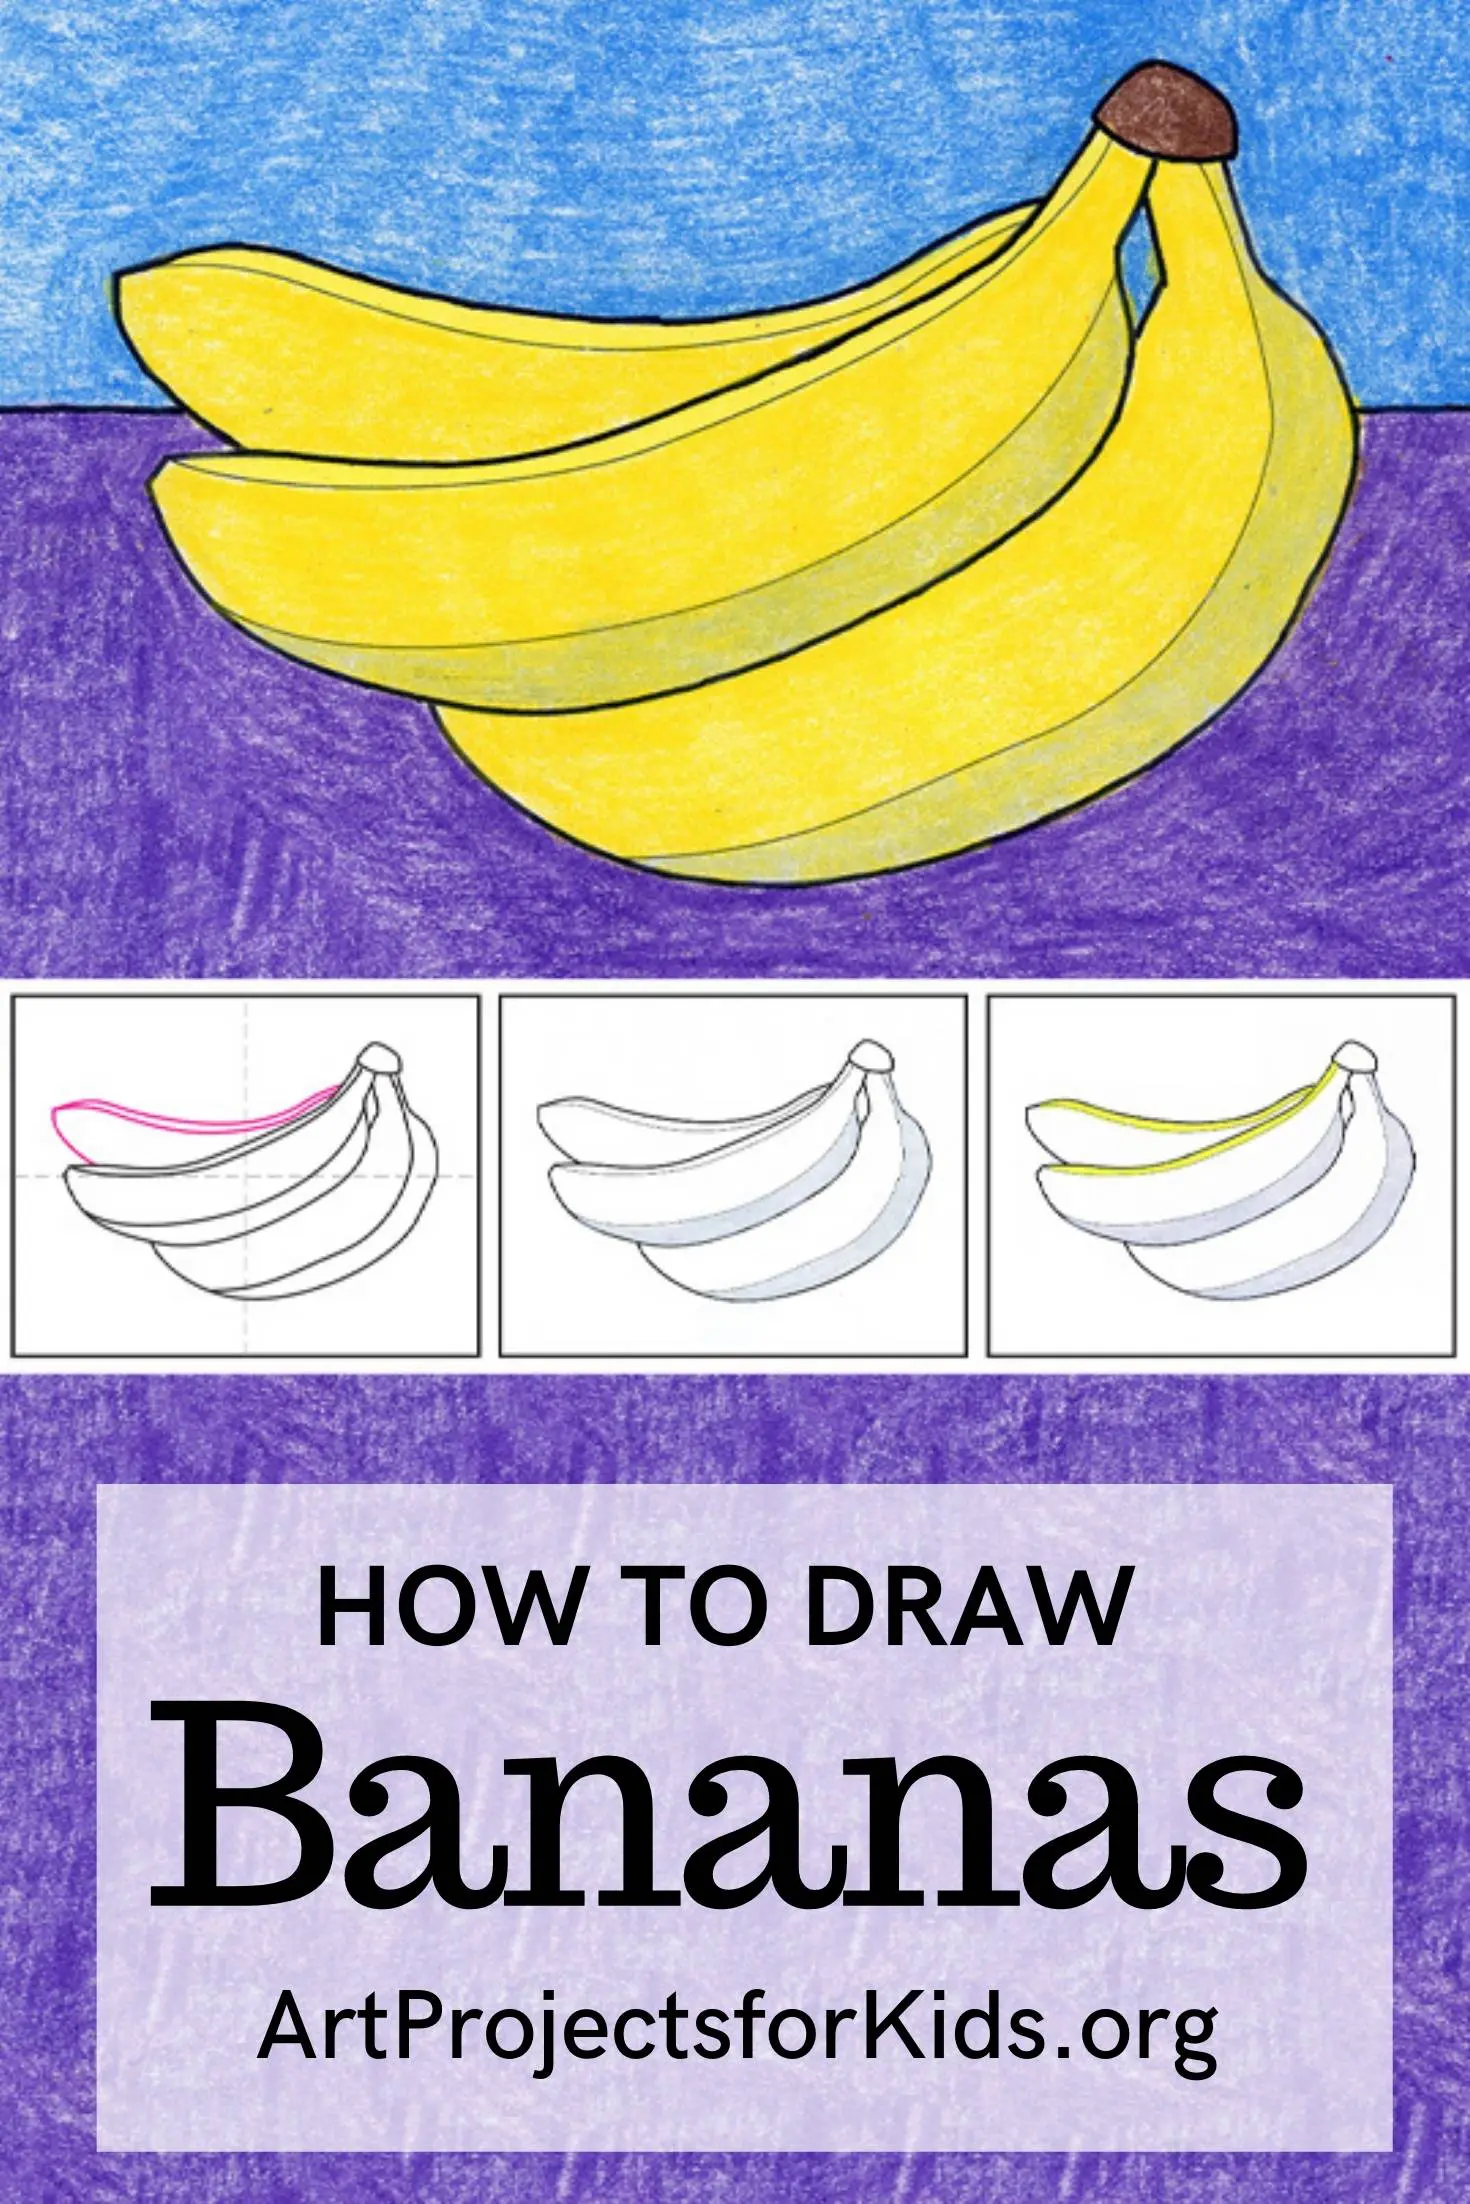 How To Draw a Banana Easy Step By Step | Easy Banana Drawing - YouTube